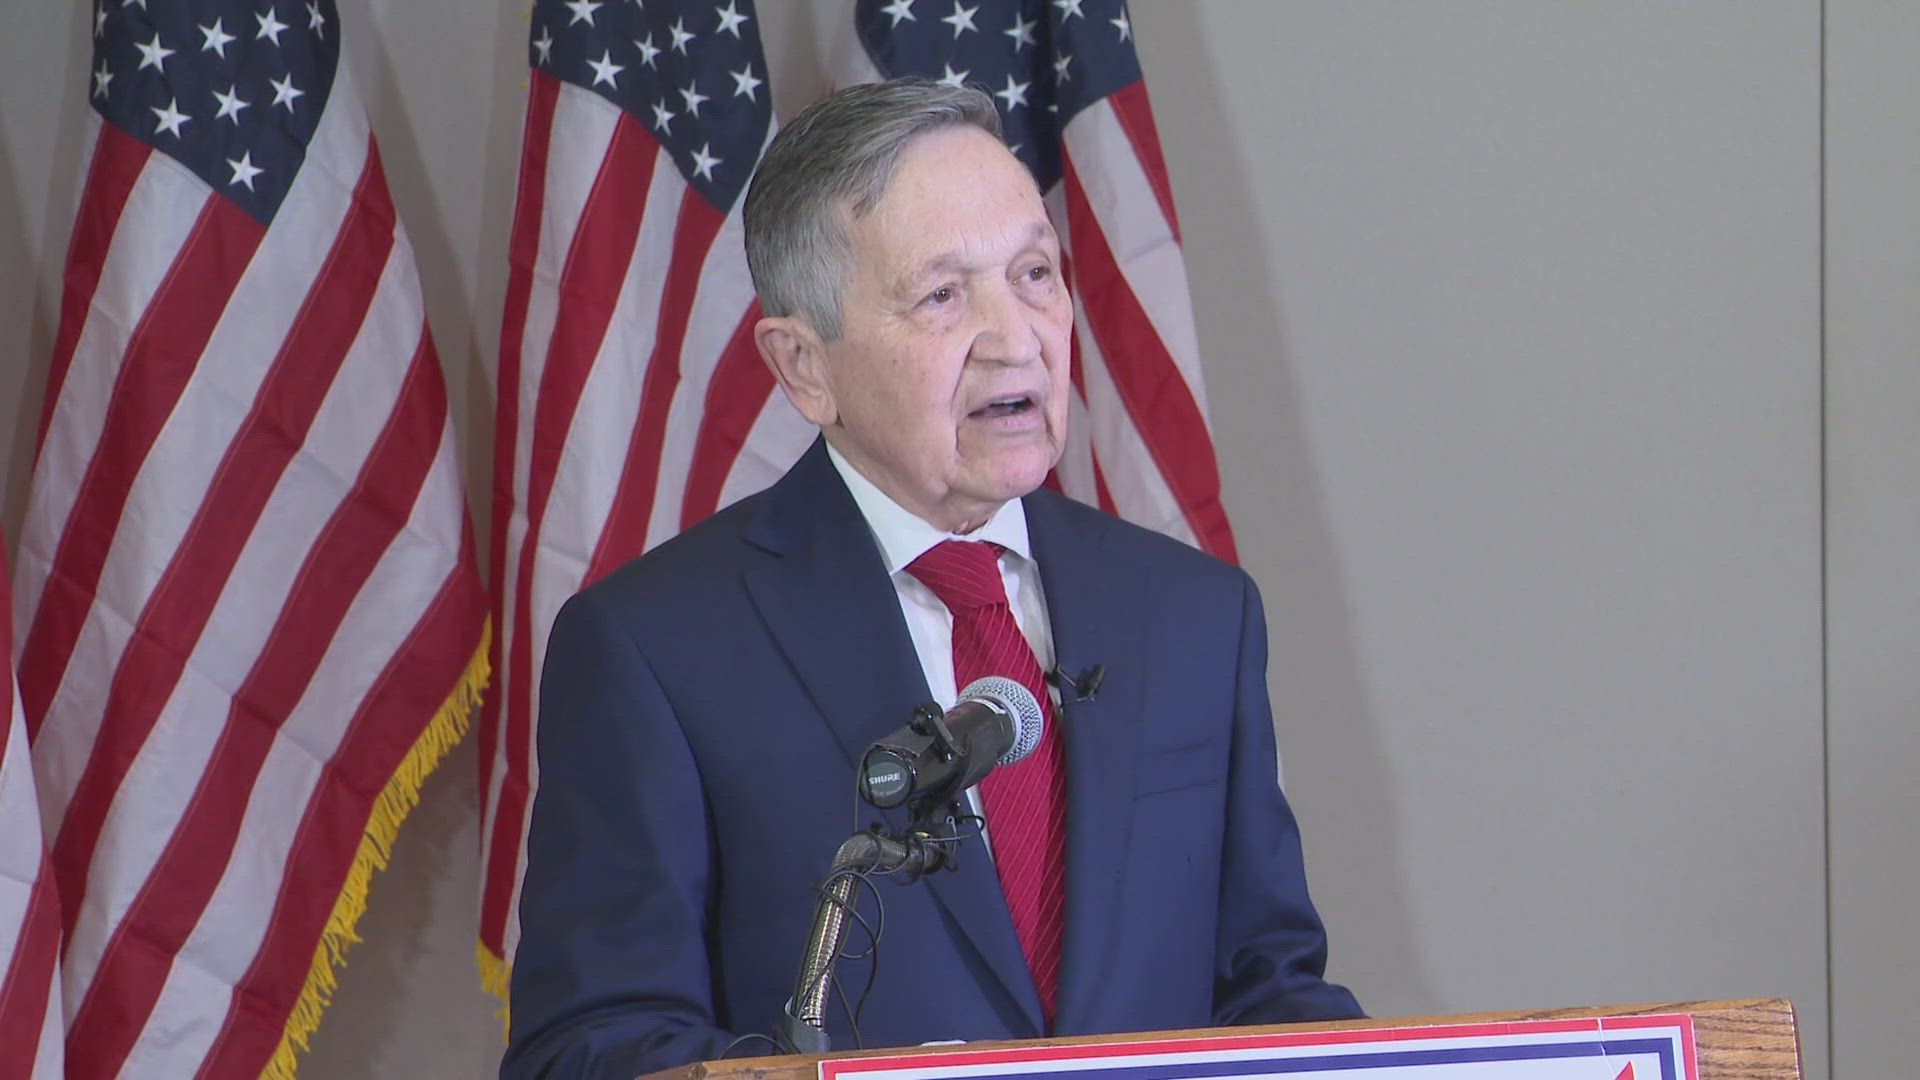 Kucinich, who served in the House of Representatives for 16 years, will run as an independent to represent Ohio's 7th Congressional District.